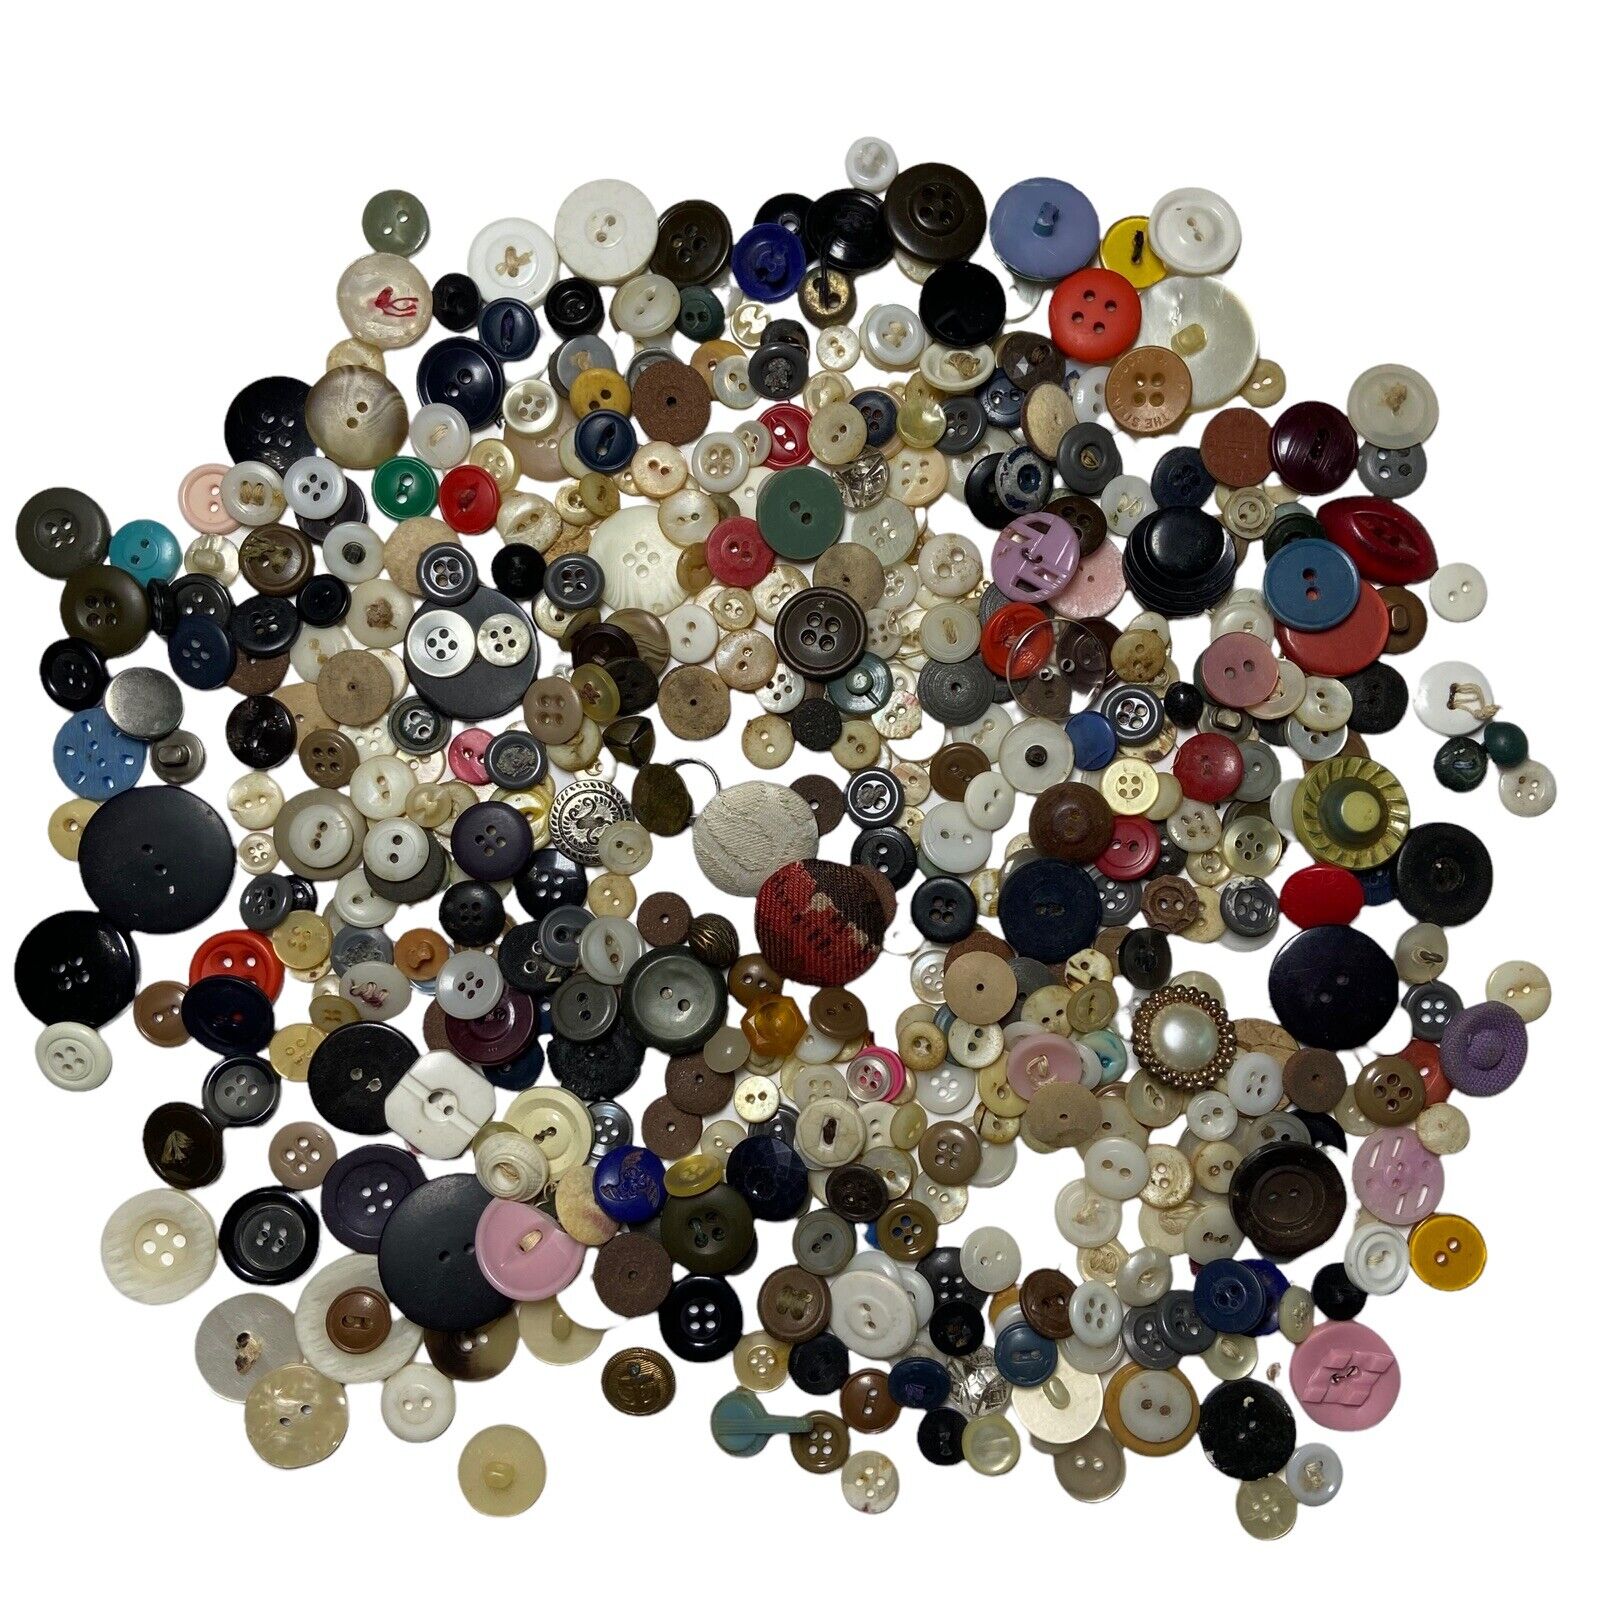 MIXED LOT OF VINTAGE ESTATE BUTTONS 10.8 Oz. Lot #1